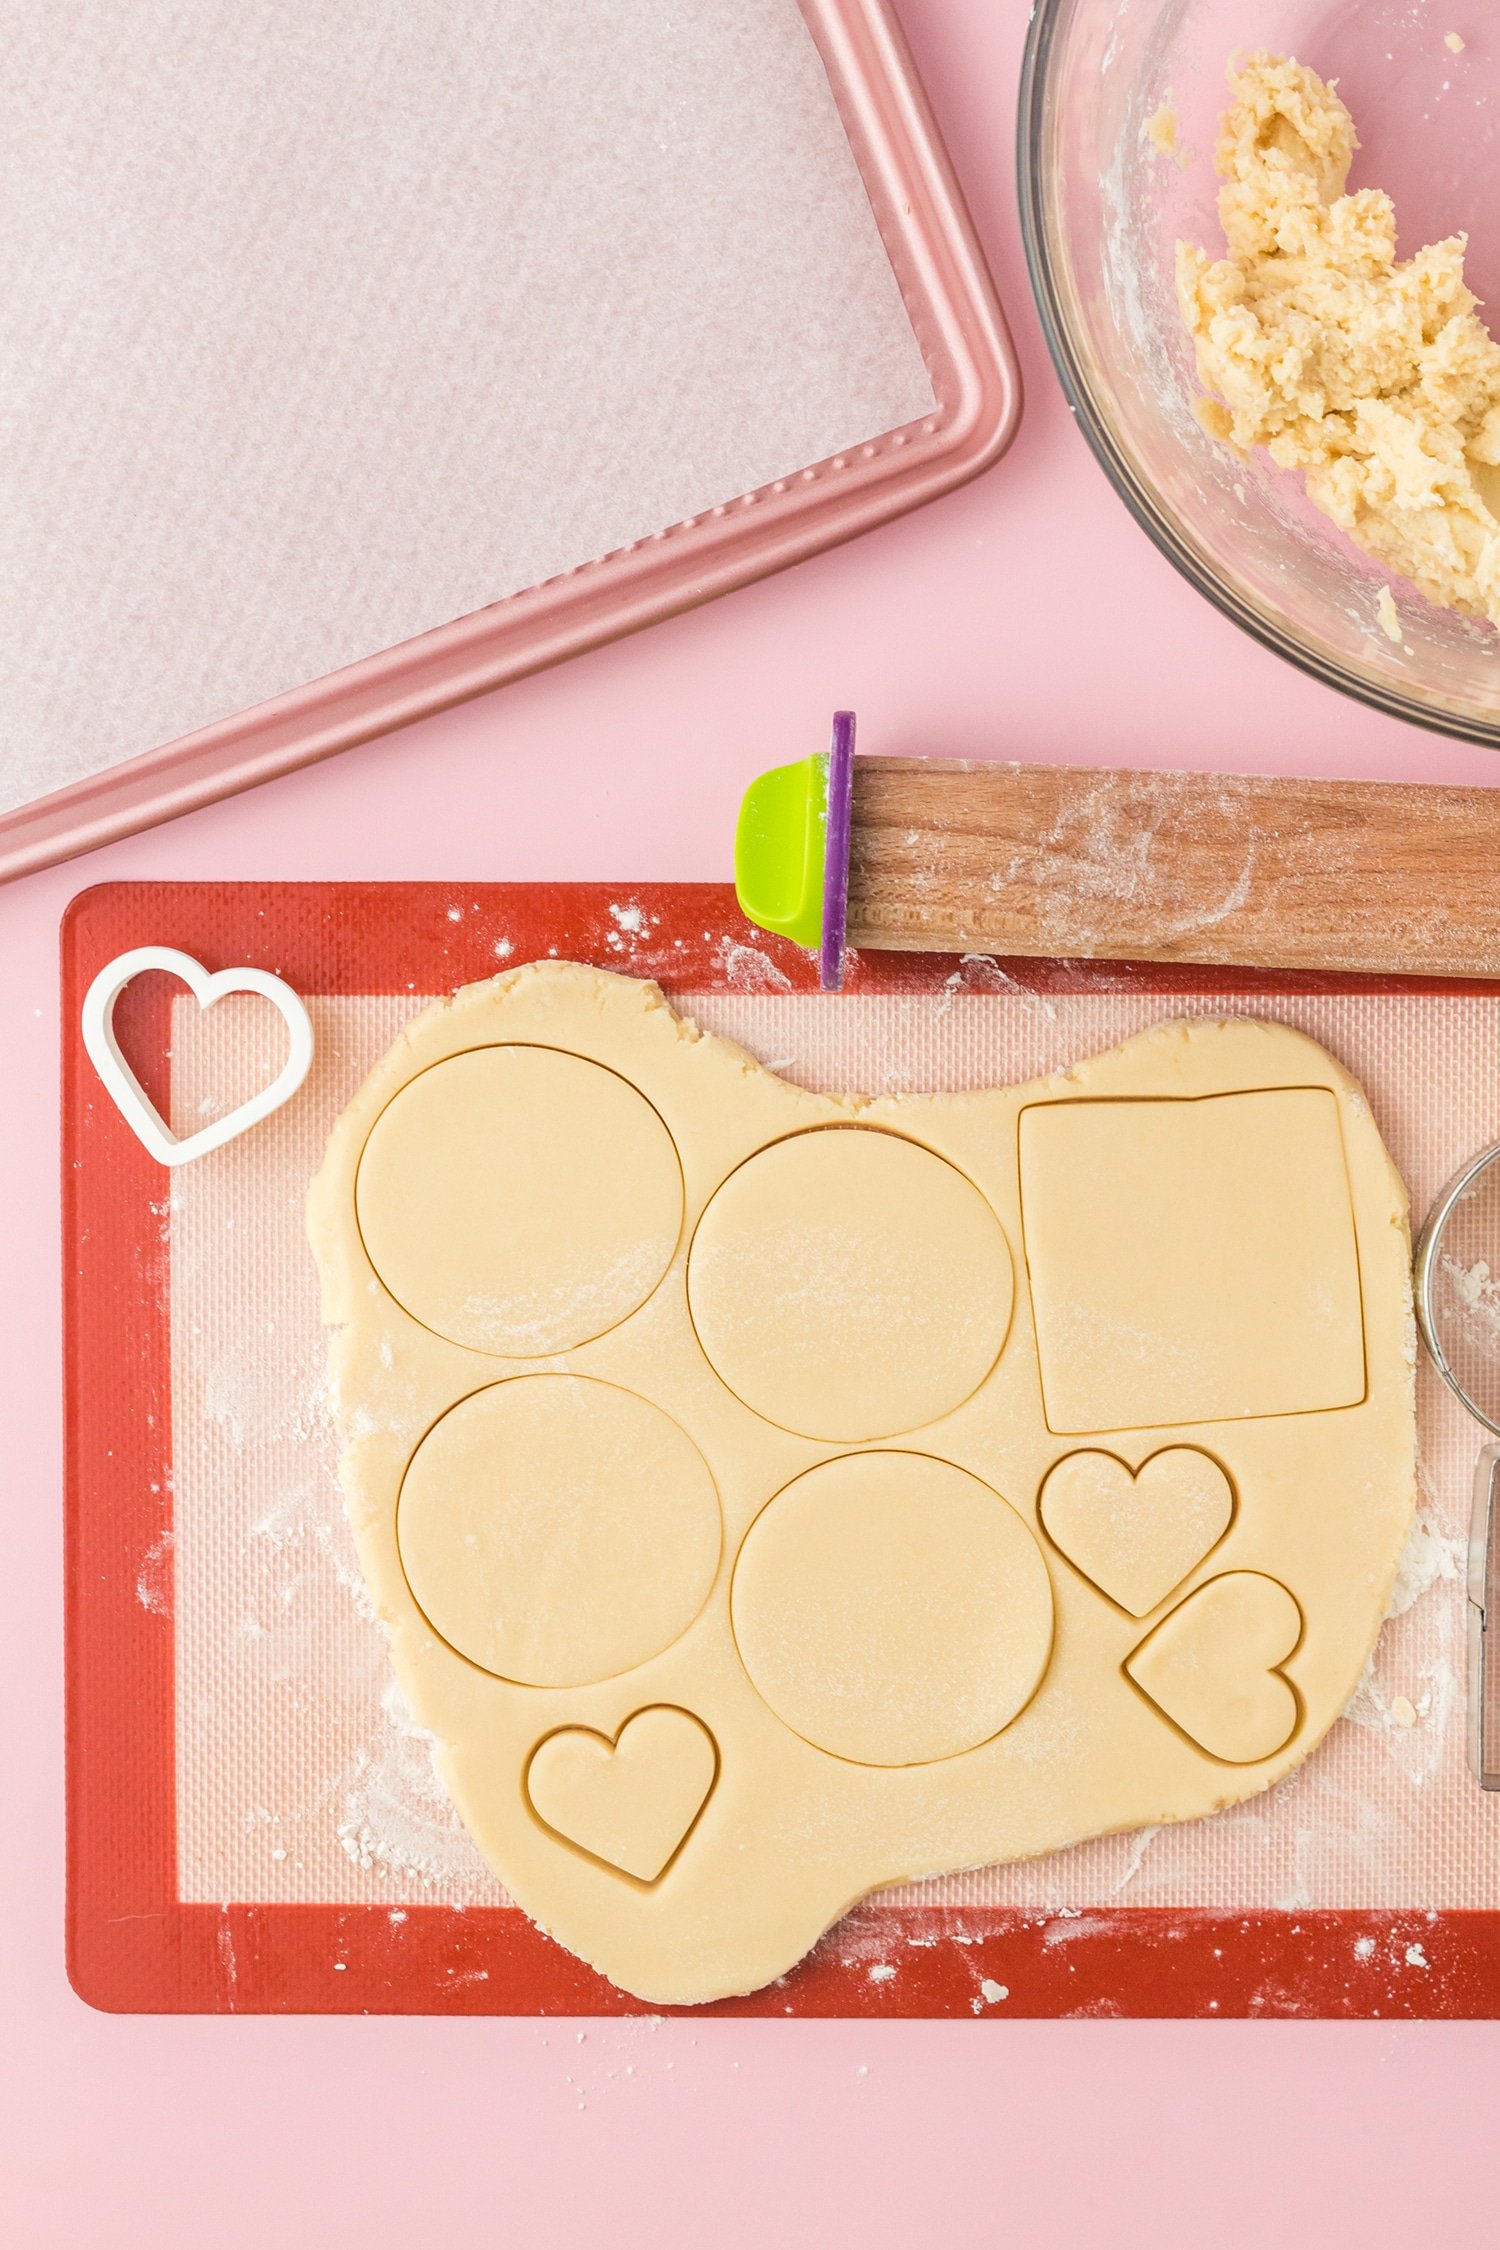 Sugar cookie dough and cutouts on a silicone mat on pink background